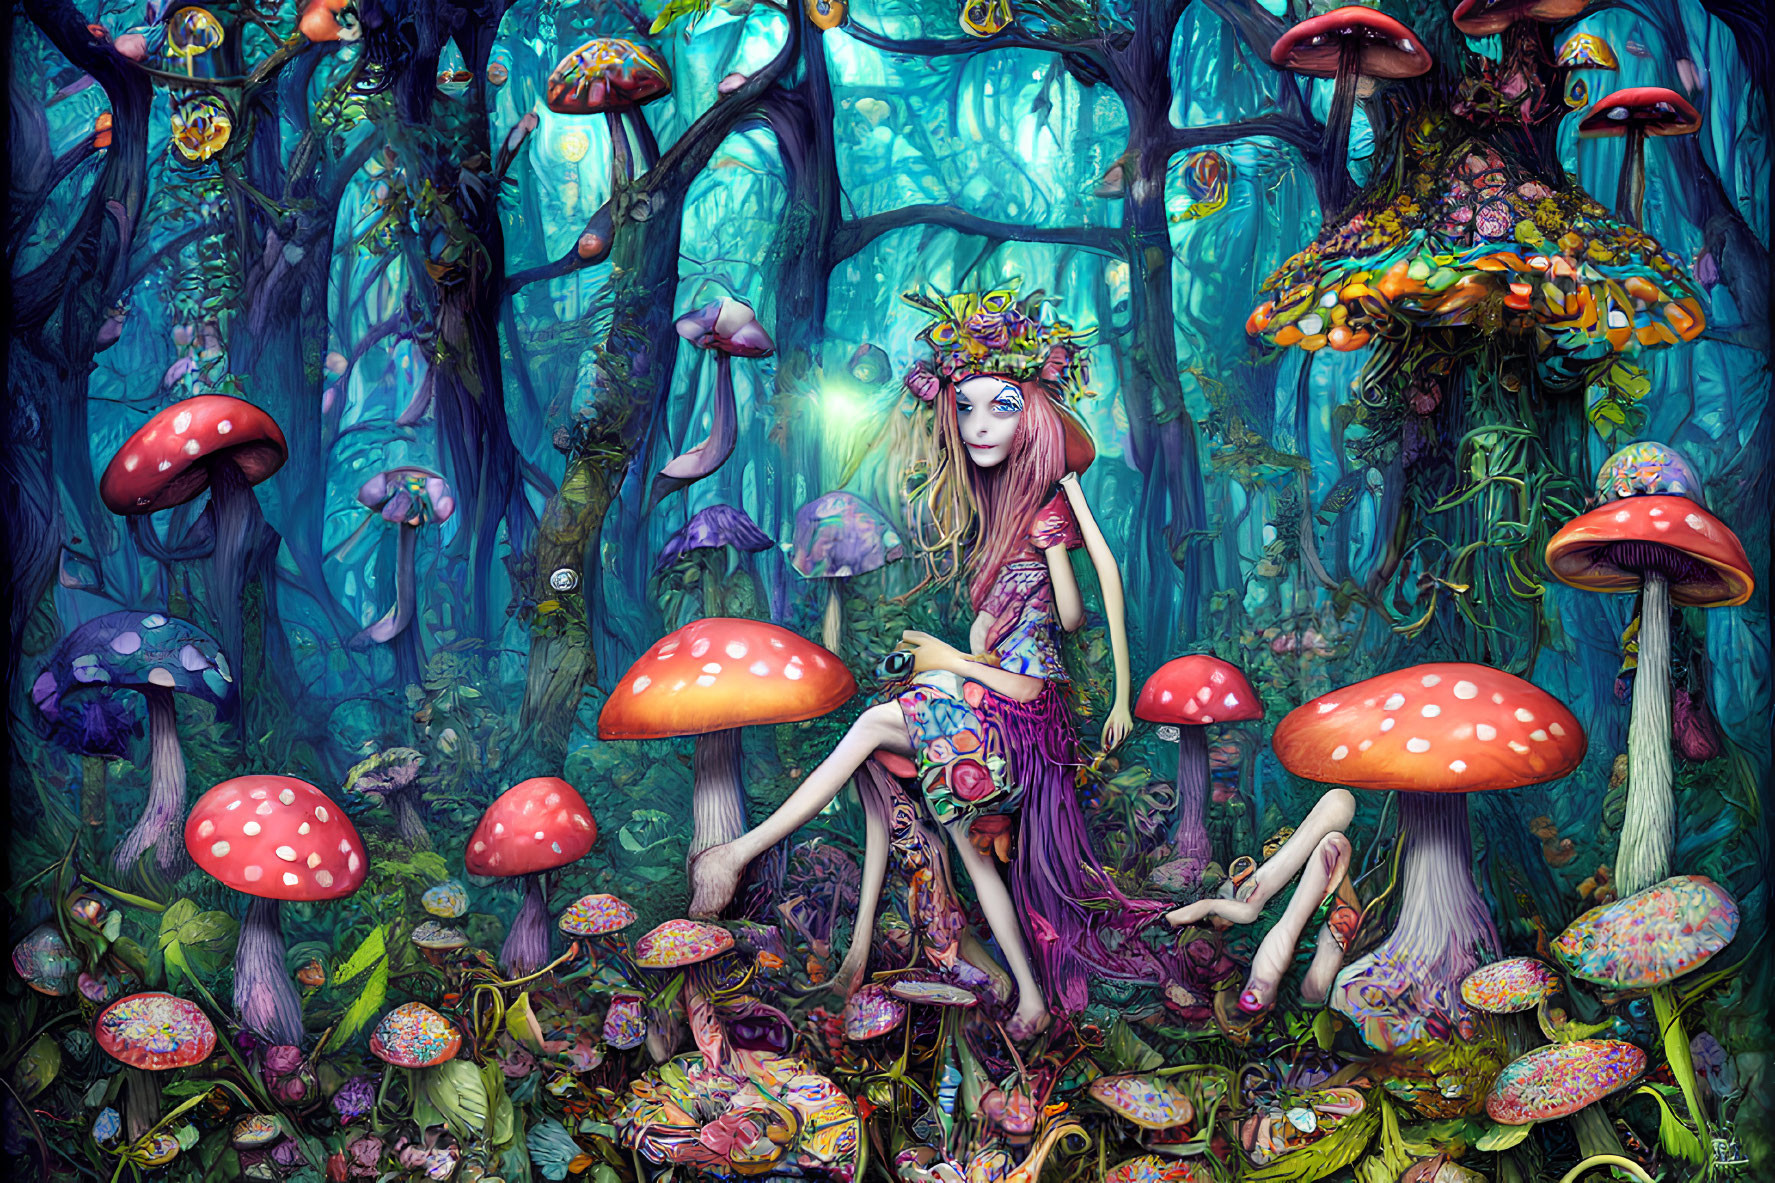 Woman in mystical forest with oversized mushrooms and intricate plants